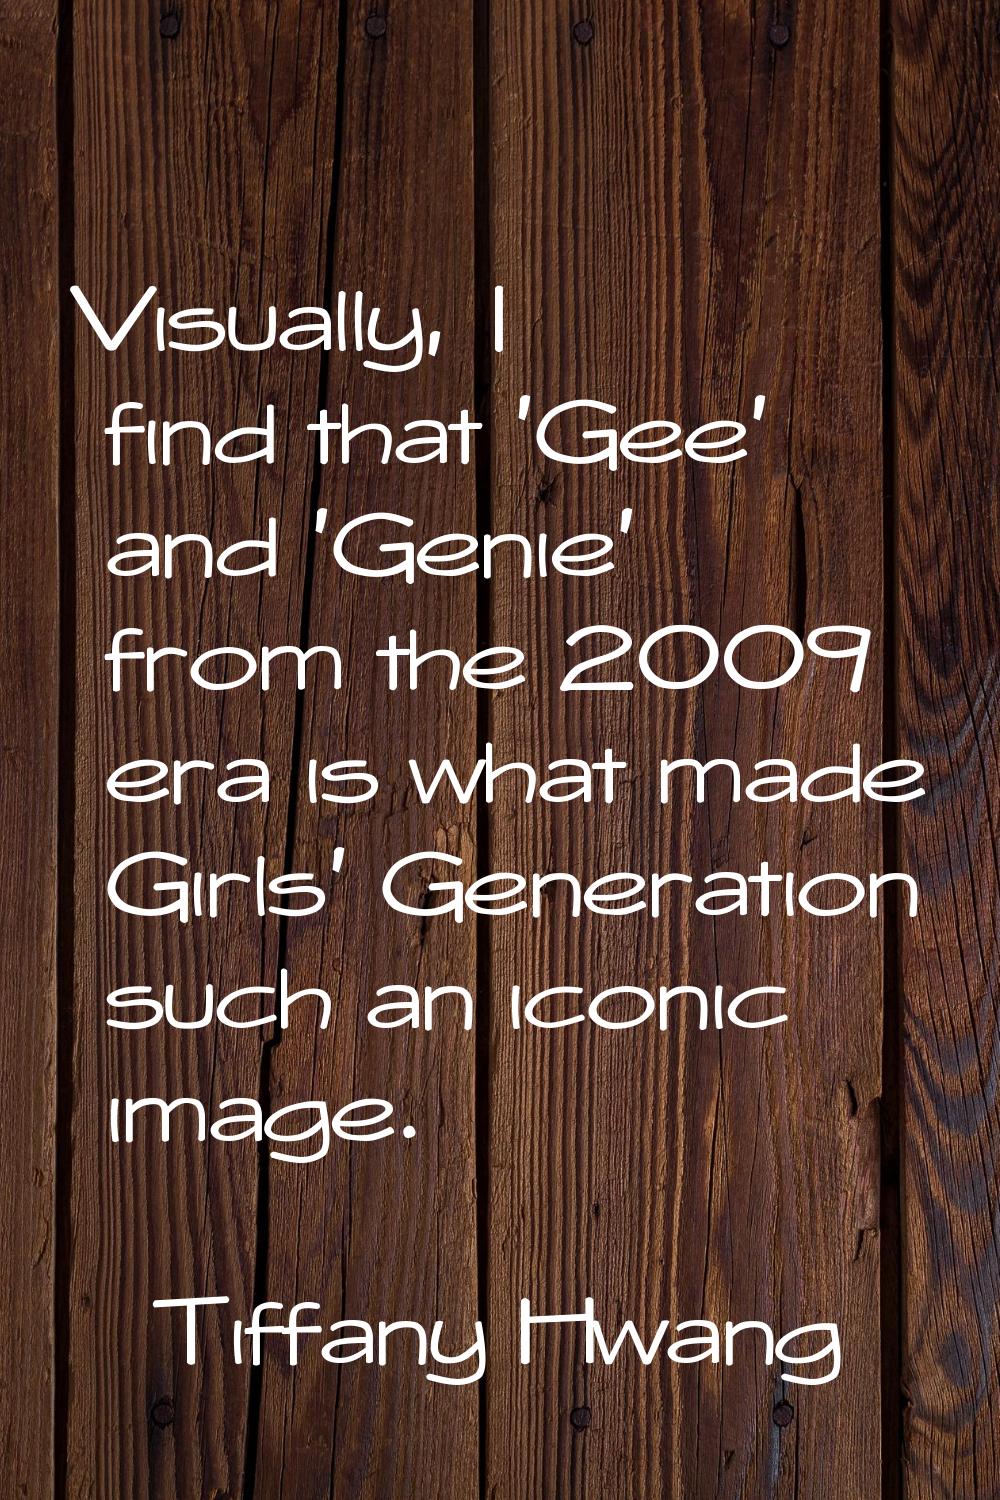 Visually, I find that 'Gee' and 'Genie' from the 2009 era is what made Girls' Generation such an ic